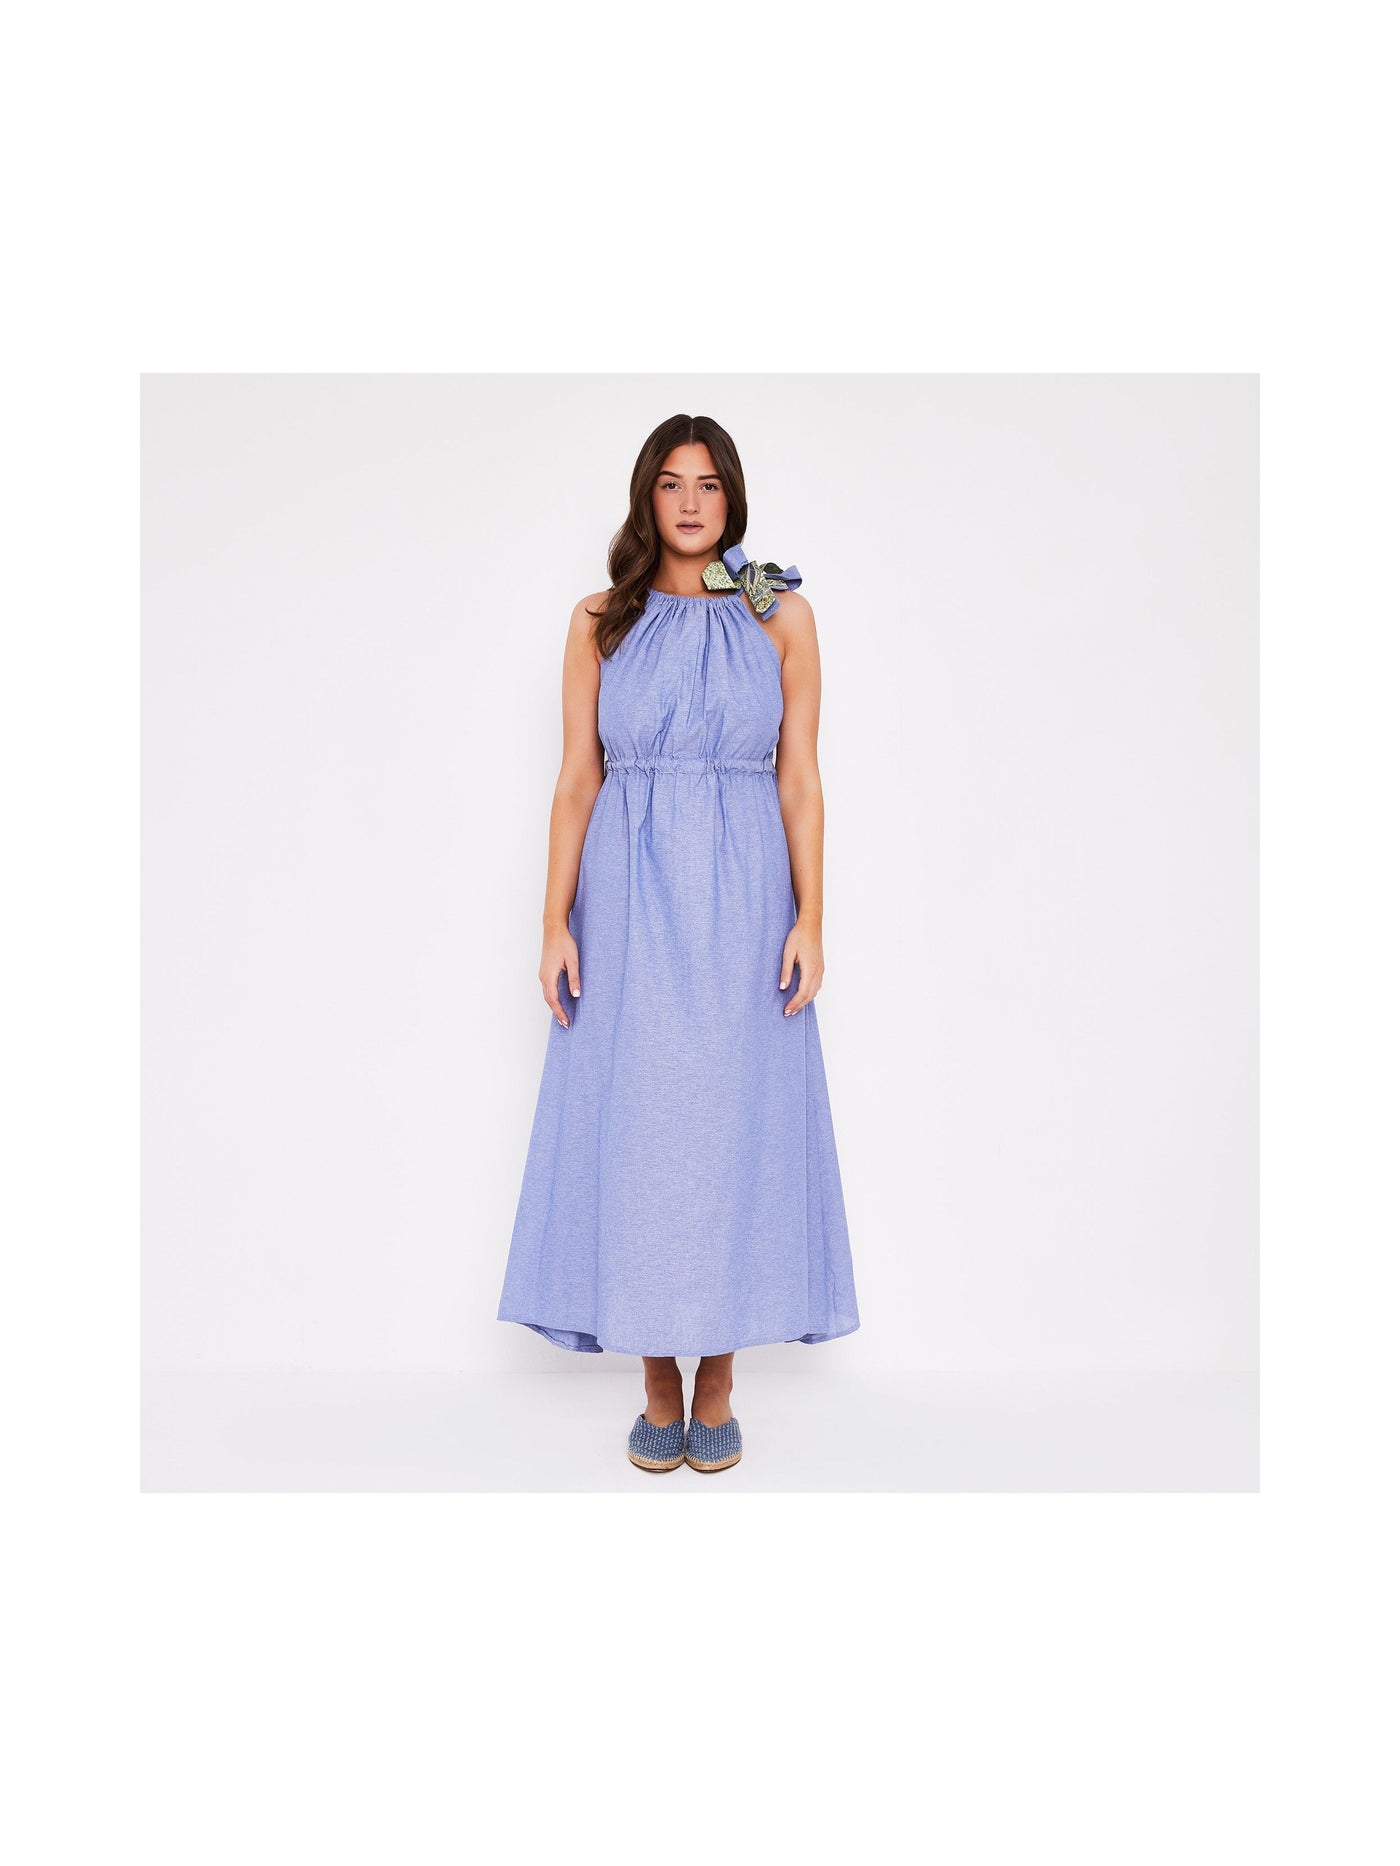 Cotton Serenity dress by COCOOVE